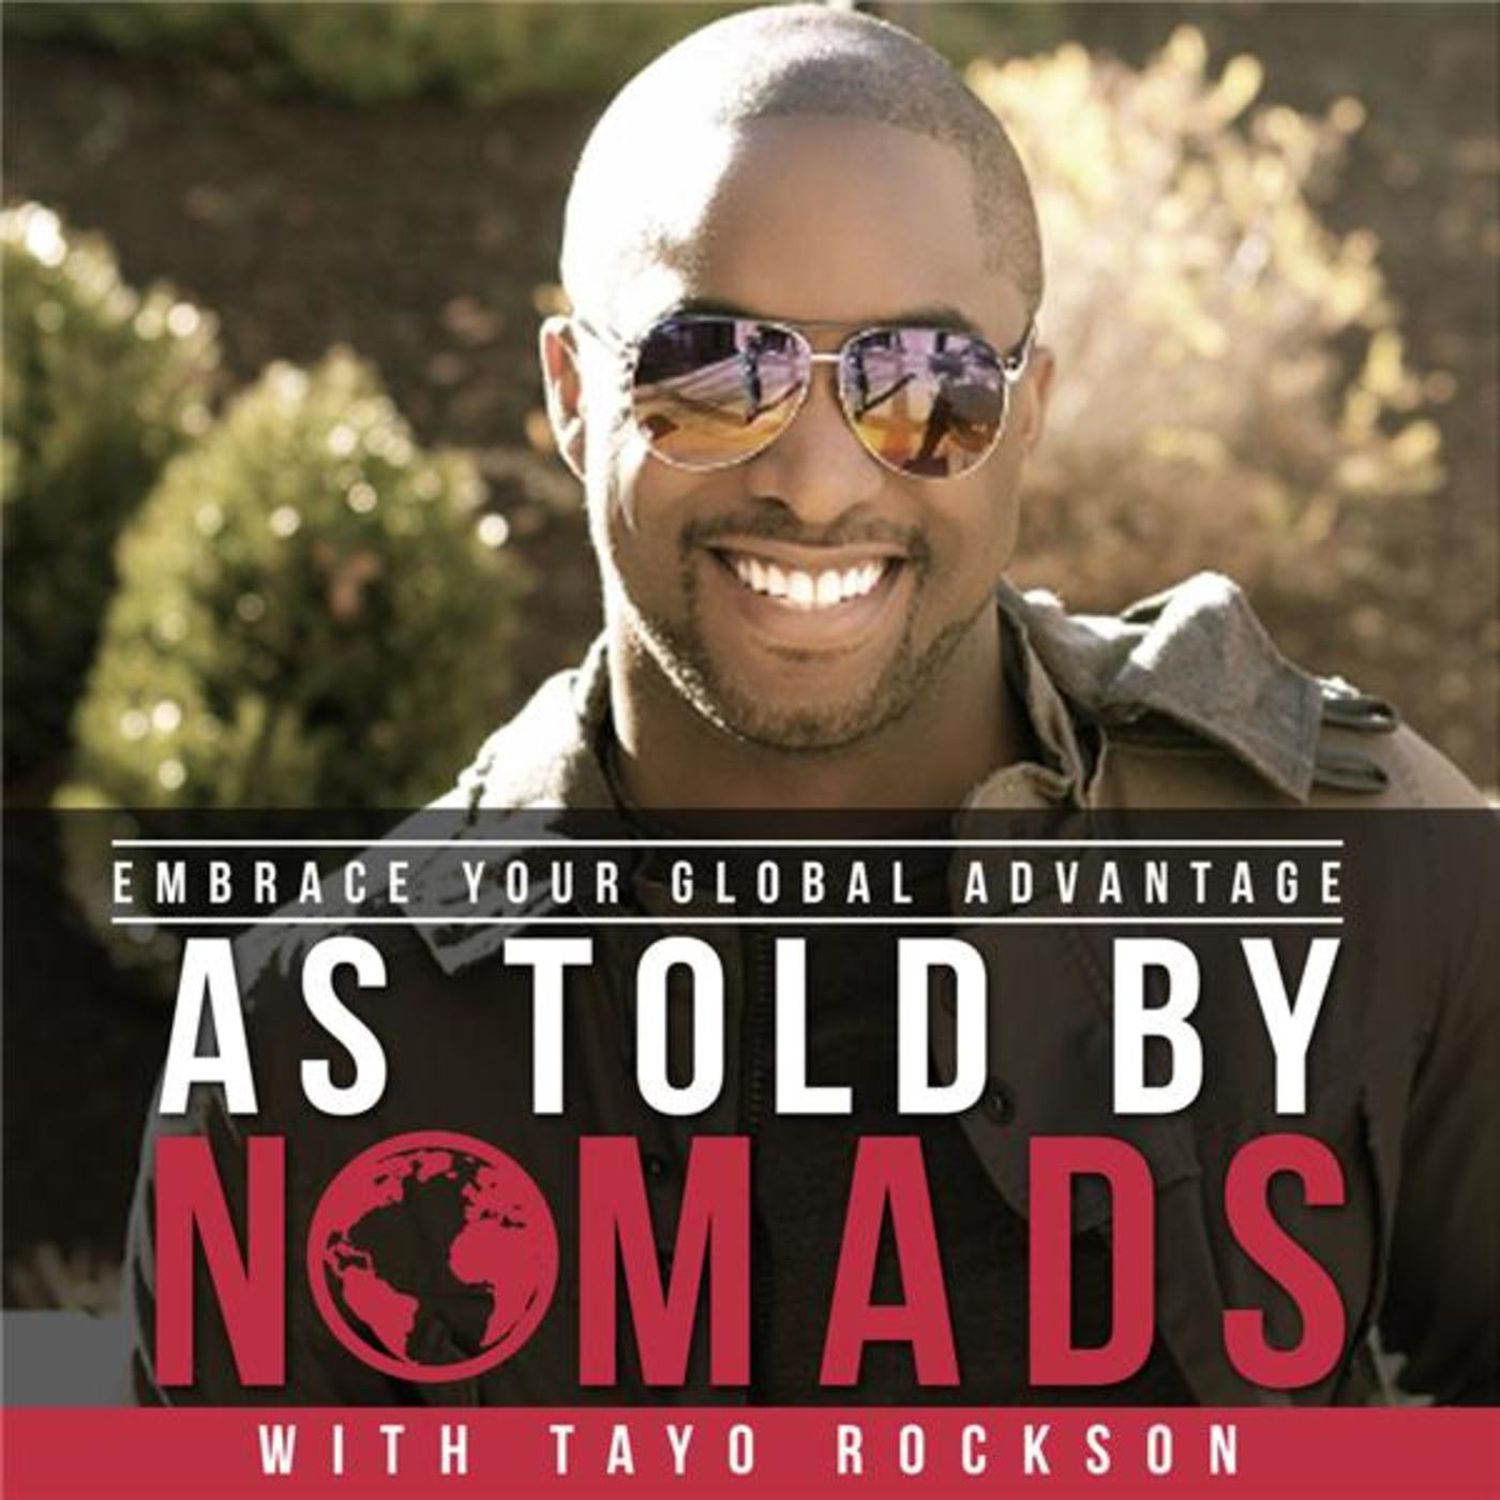 Tayo Rockson, As Told By Nomads Podcast Graphic